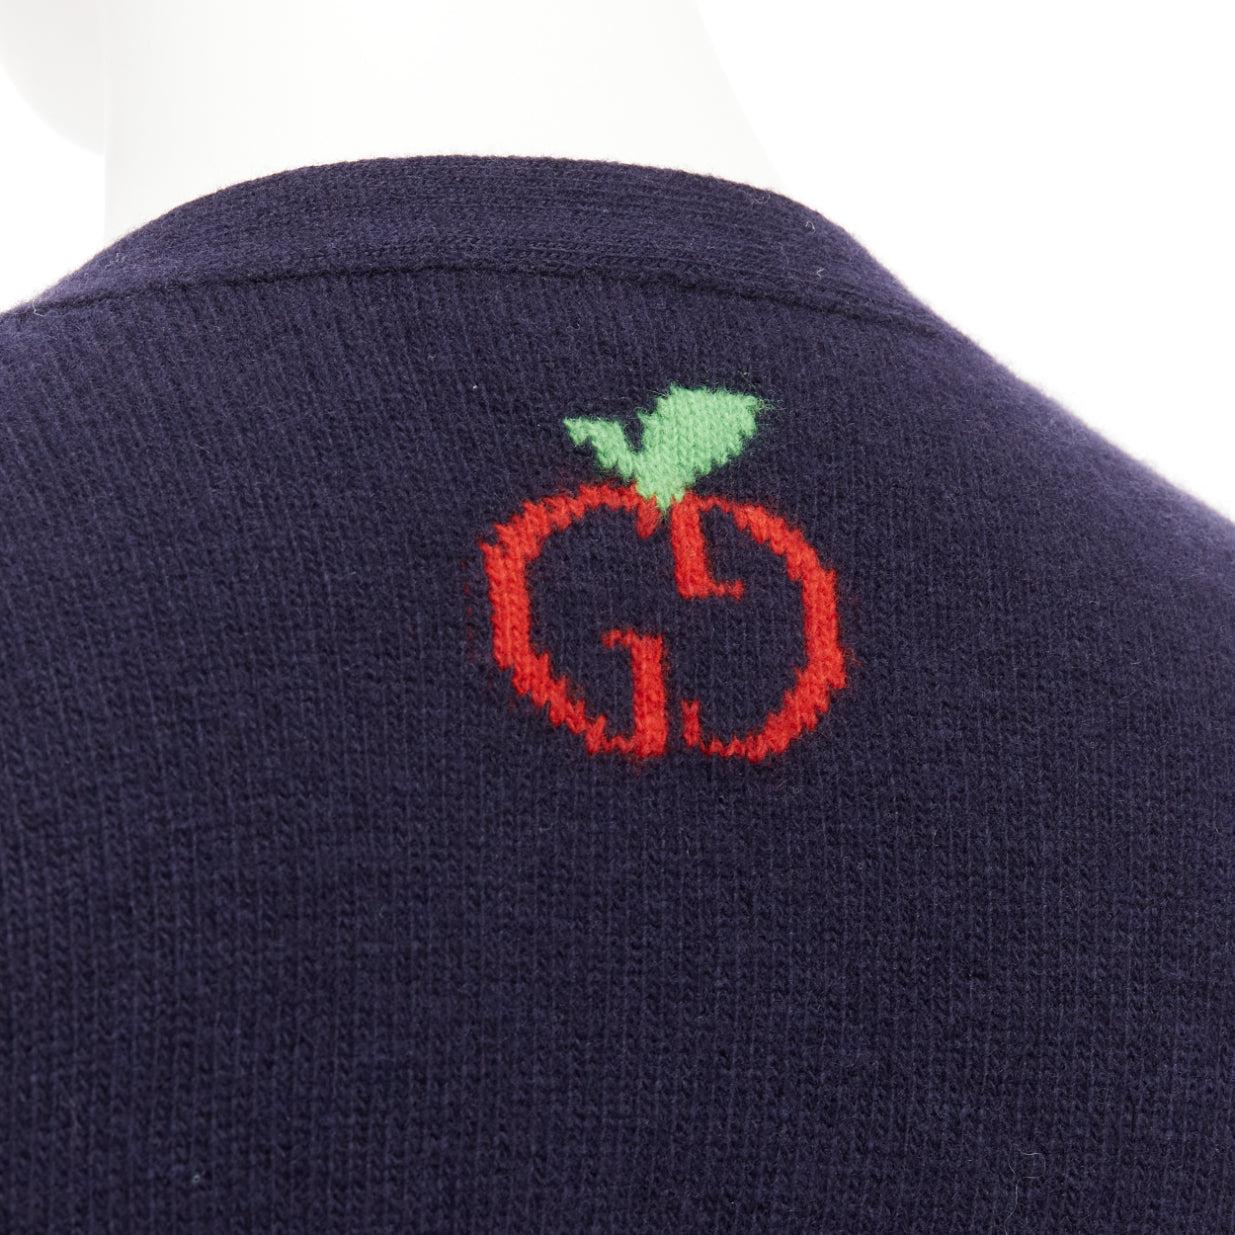 GUCCI Kids 100% wool navy red apple GG logo cardigan sweater 12Y XS
Reference: KYCG/A00020
Brand: Gucci
Designer: Alessandro Michele
Collection: Kids
Material: Wool
Color: Navy, Red
Pattern: Apple
Closure: Button
Extra Details: Gg apple logo at